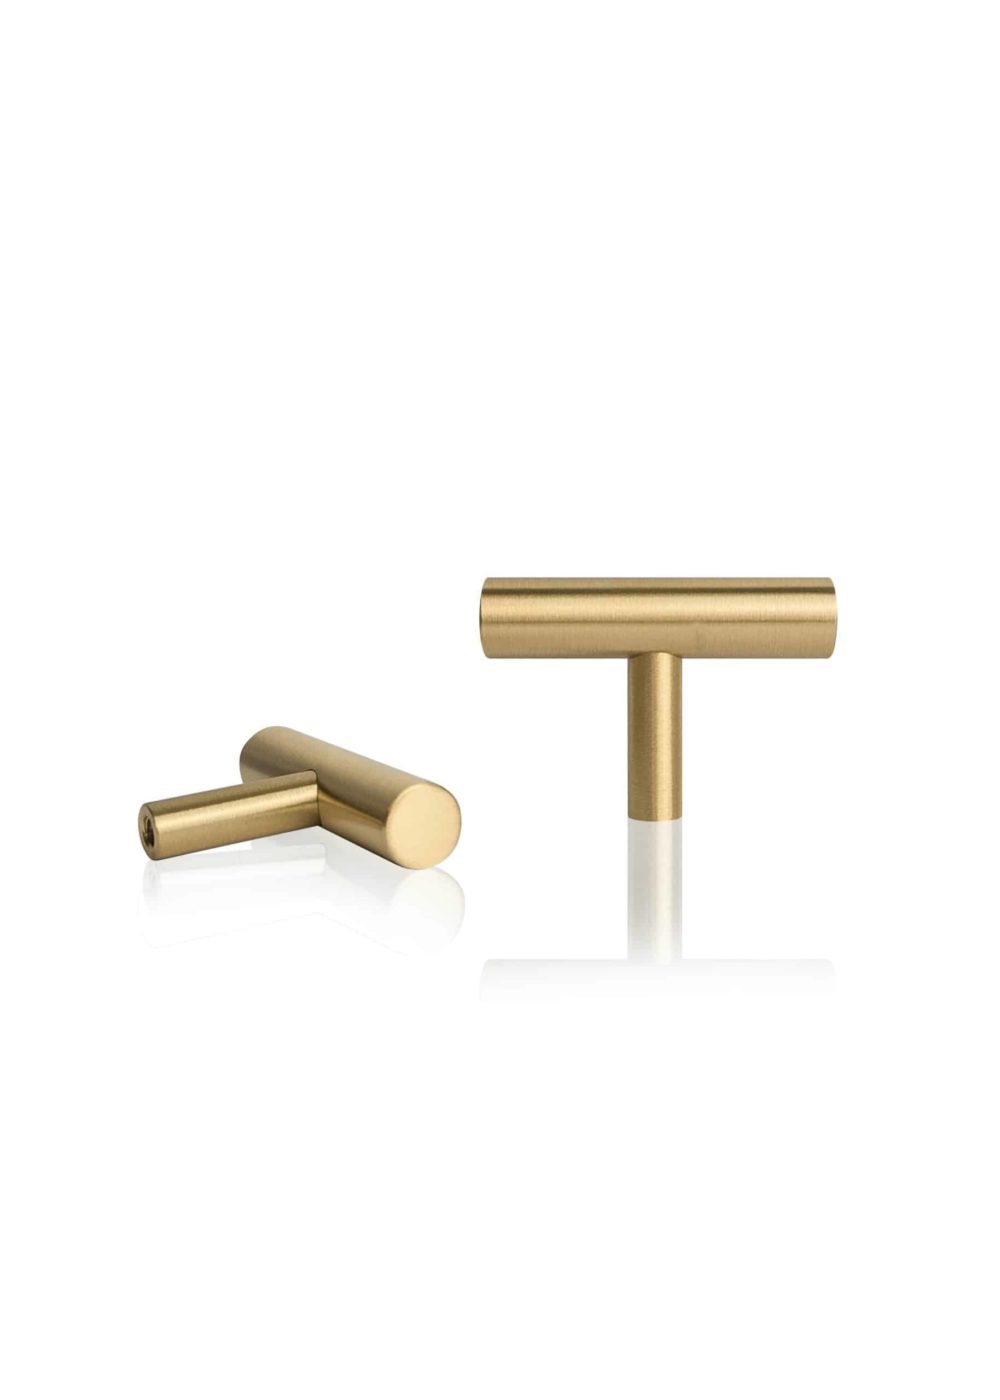 Theresa S brass cabinet handle